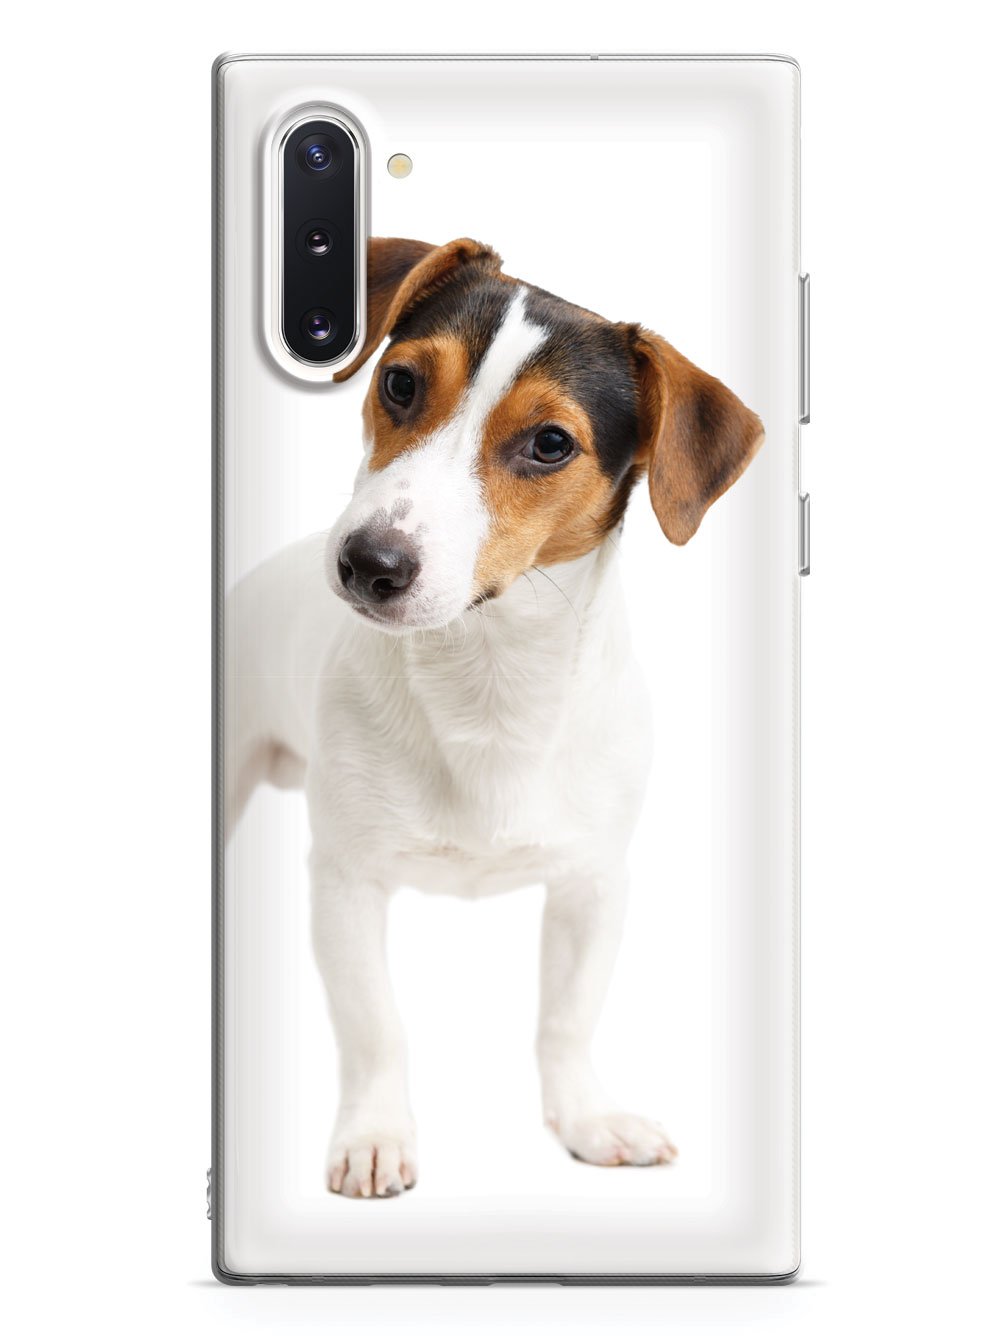 Jack Russell Terrier Puppy Case